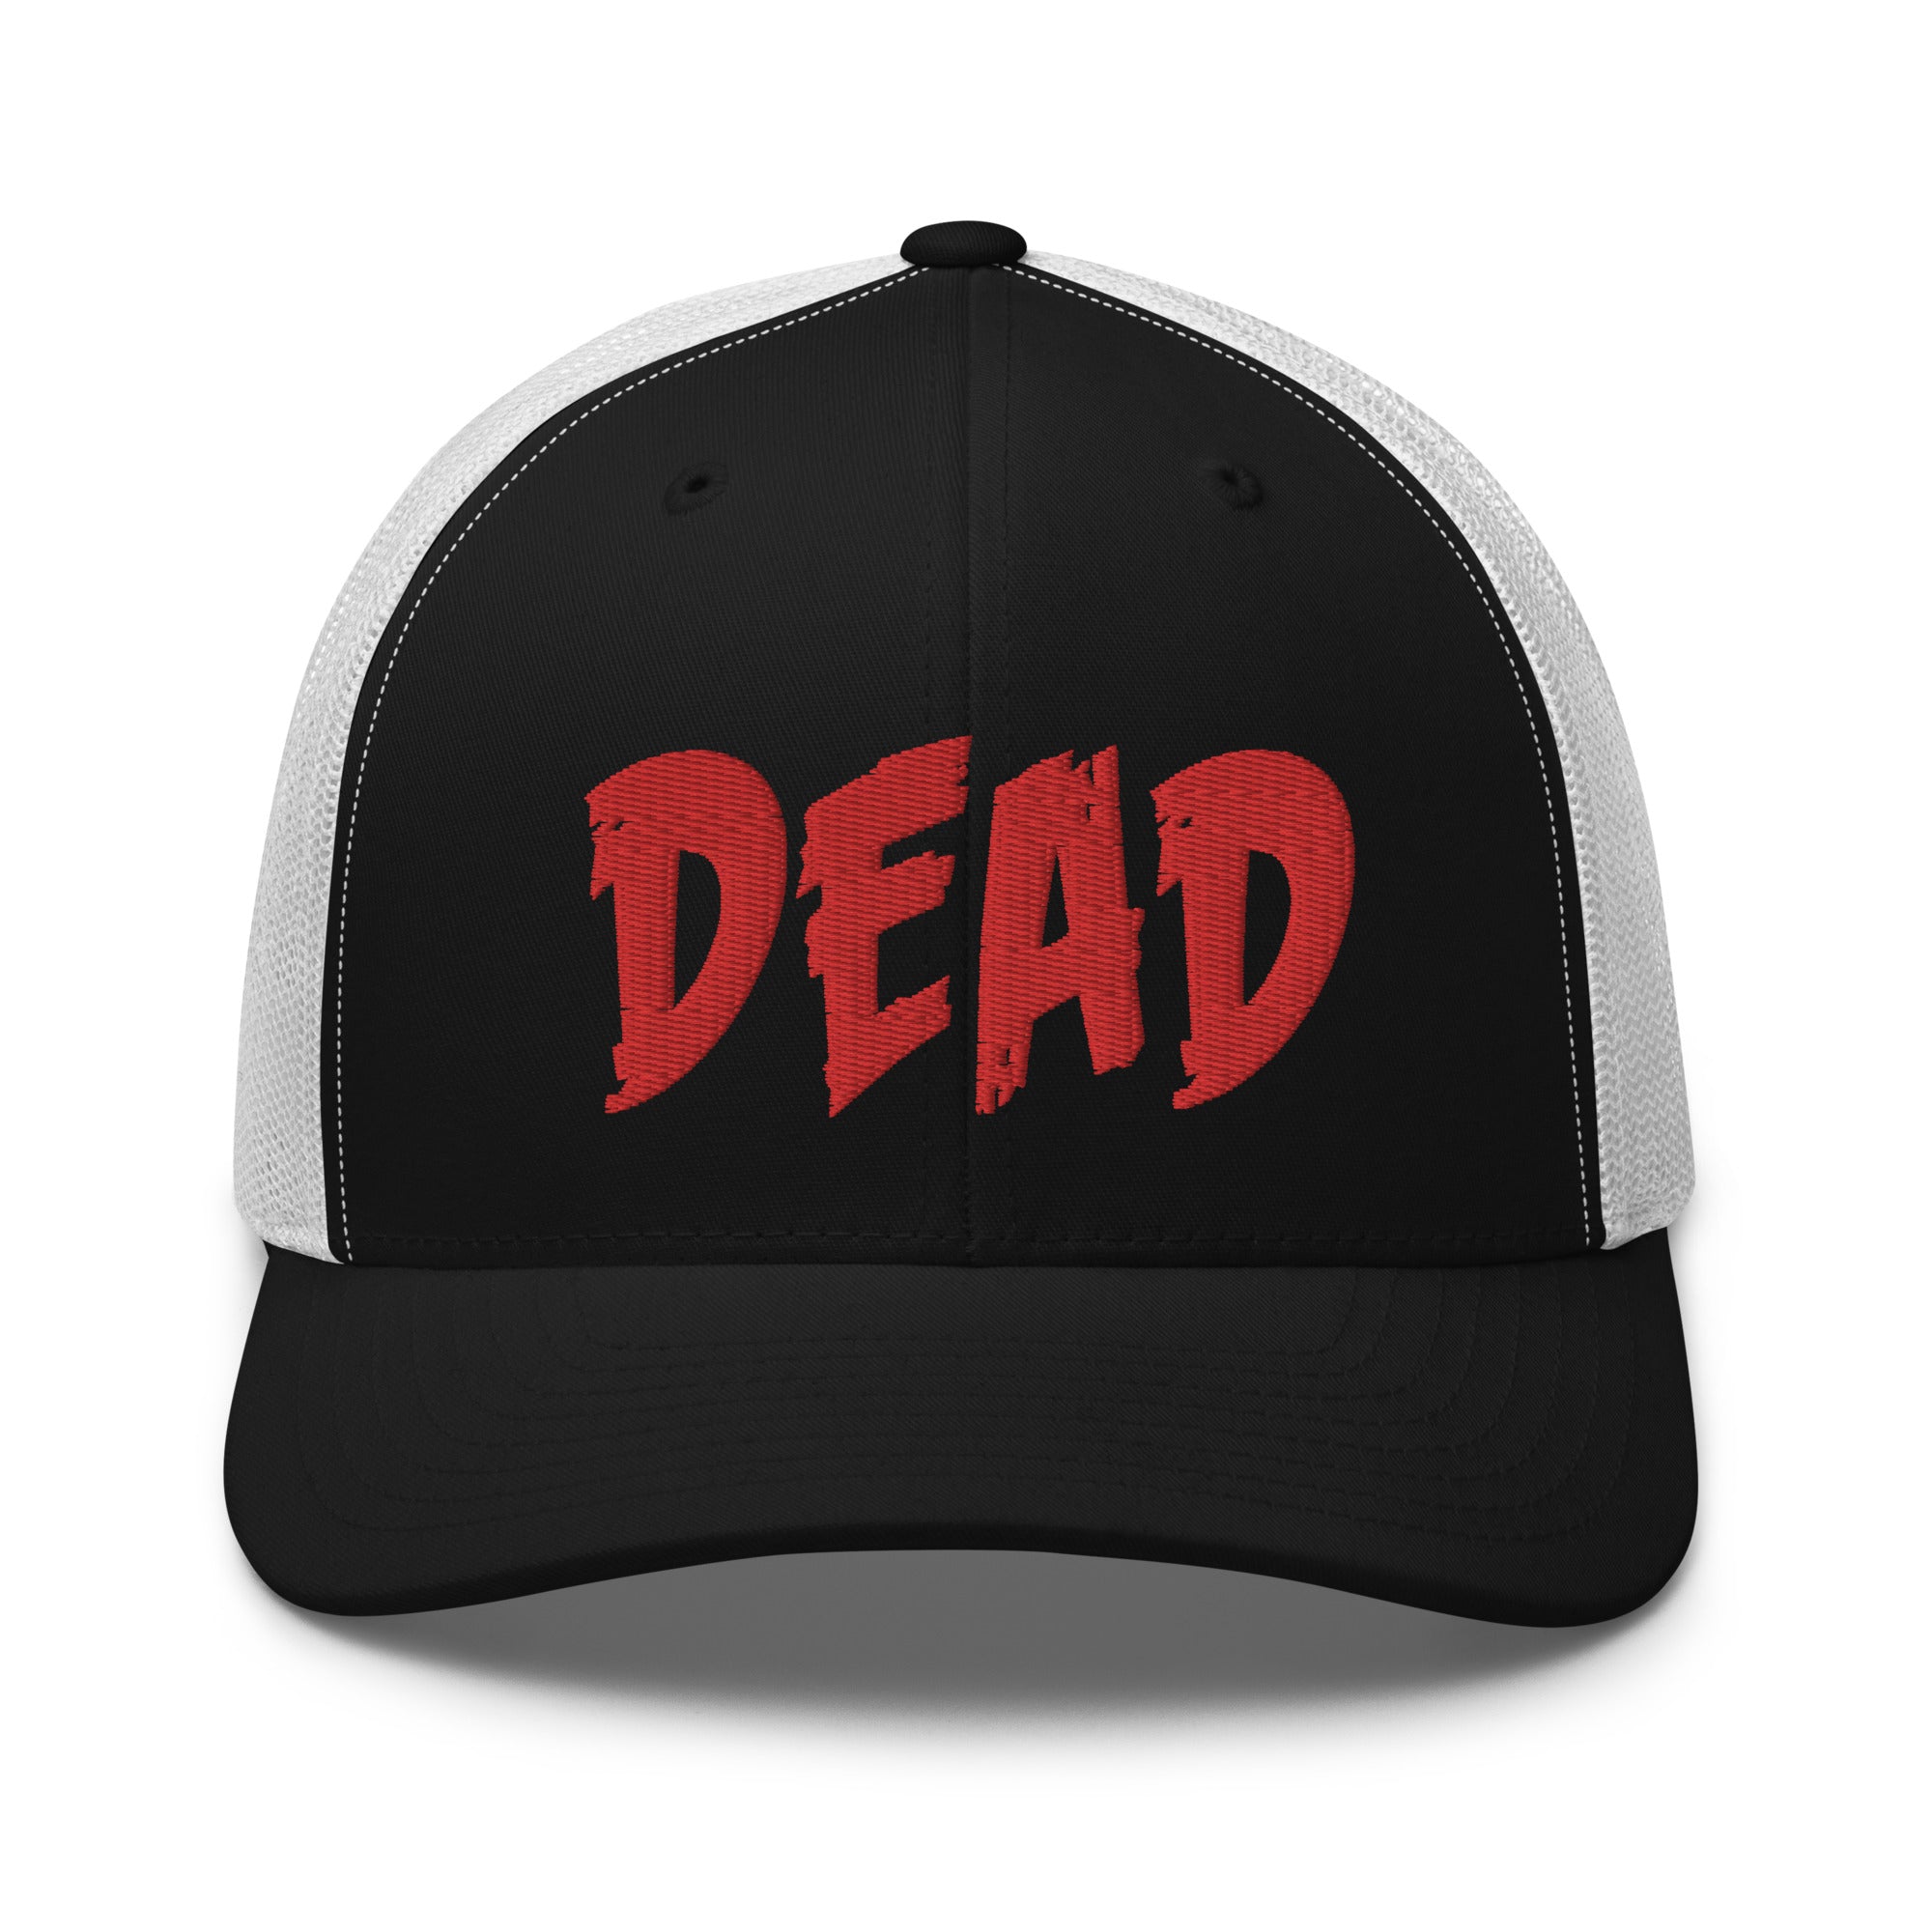 Red Thread DEAD Emotional Depression Embroidered Trucker Cap Snapback Hat